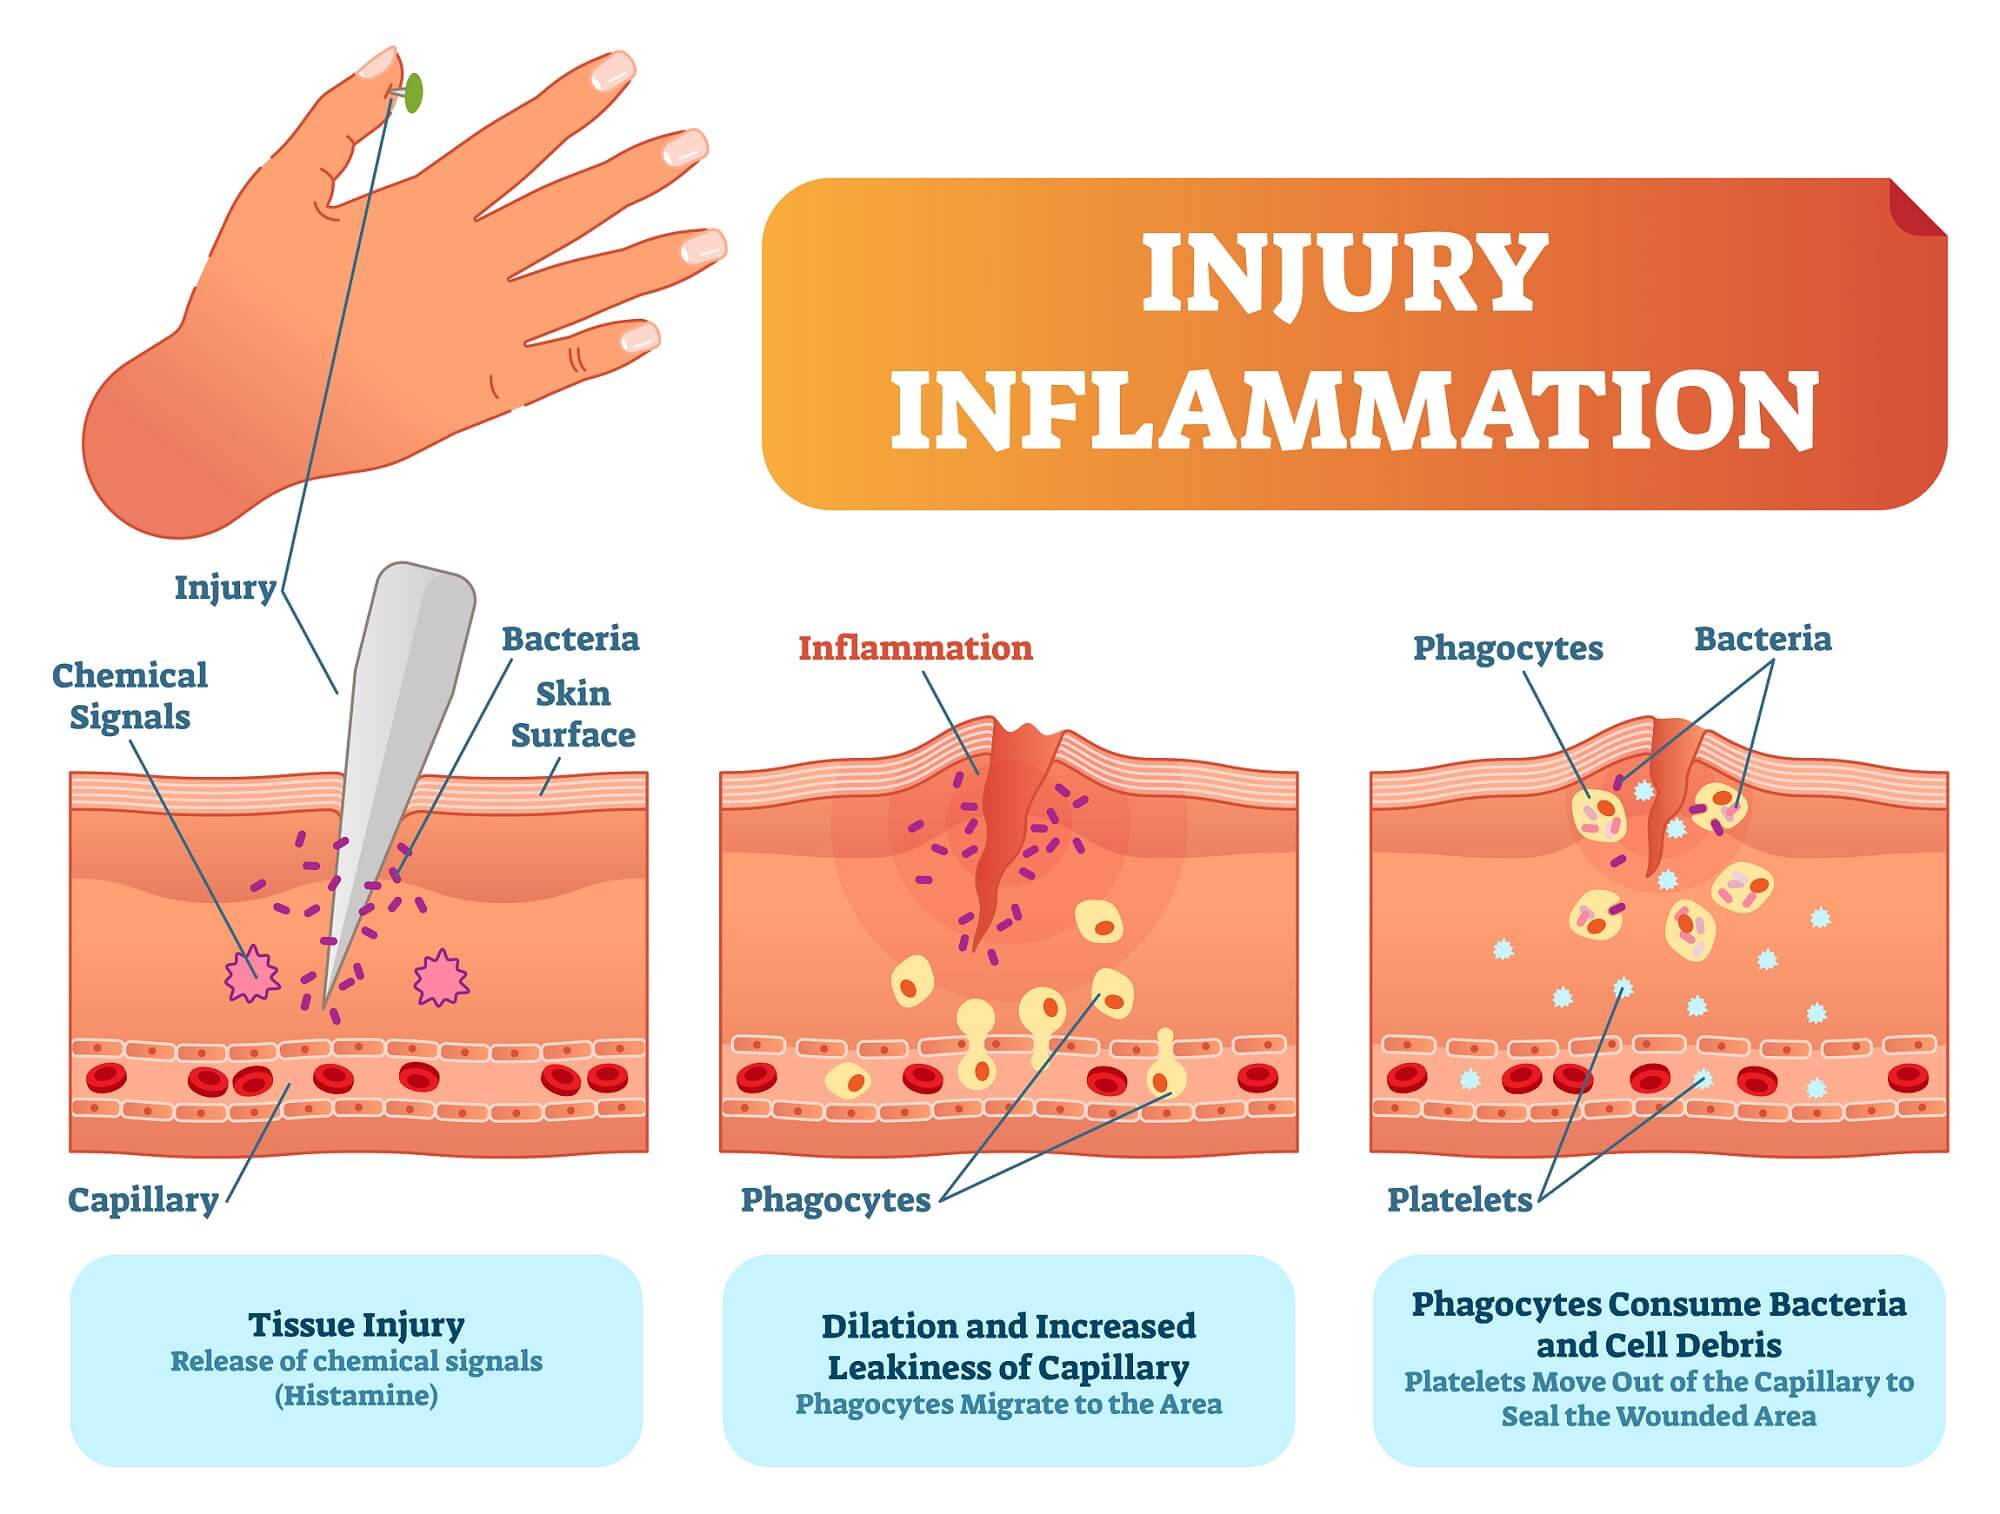 Injury inflammation biological response diagram. Skin surface injury cross section poster with capillary, phagocytes and platelets in diagram.